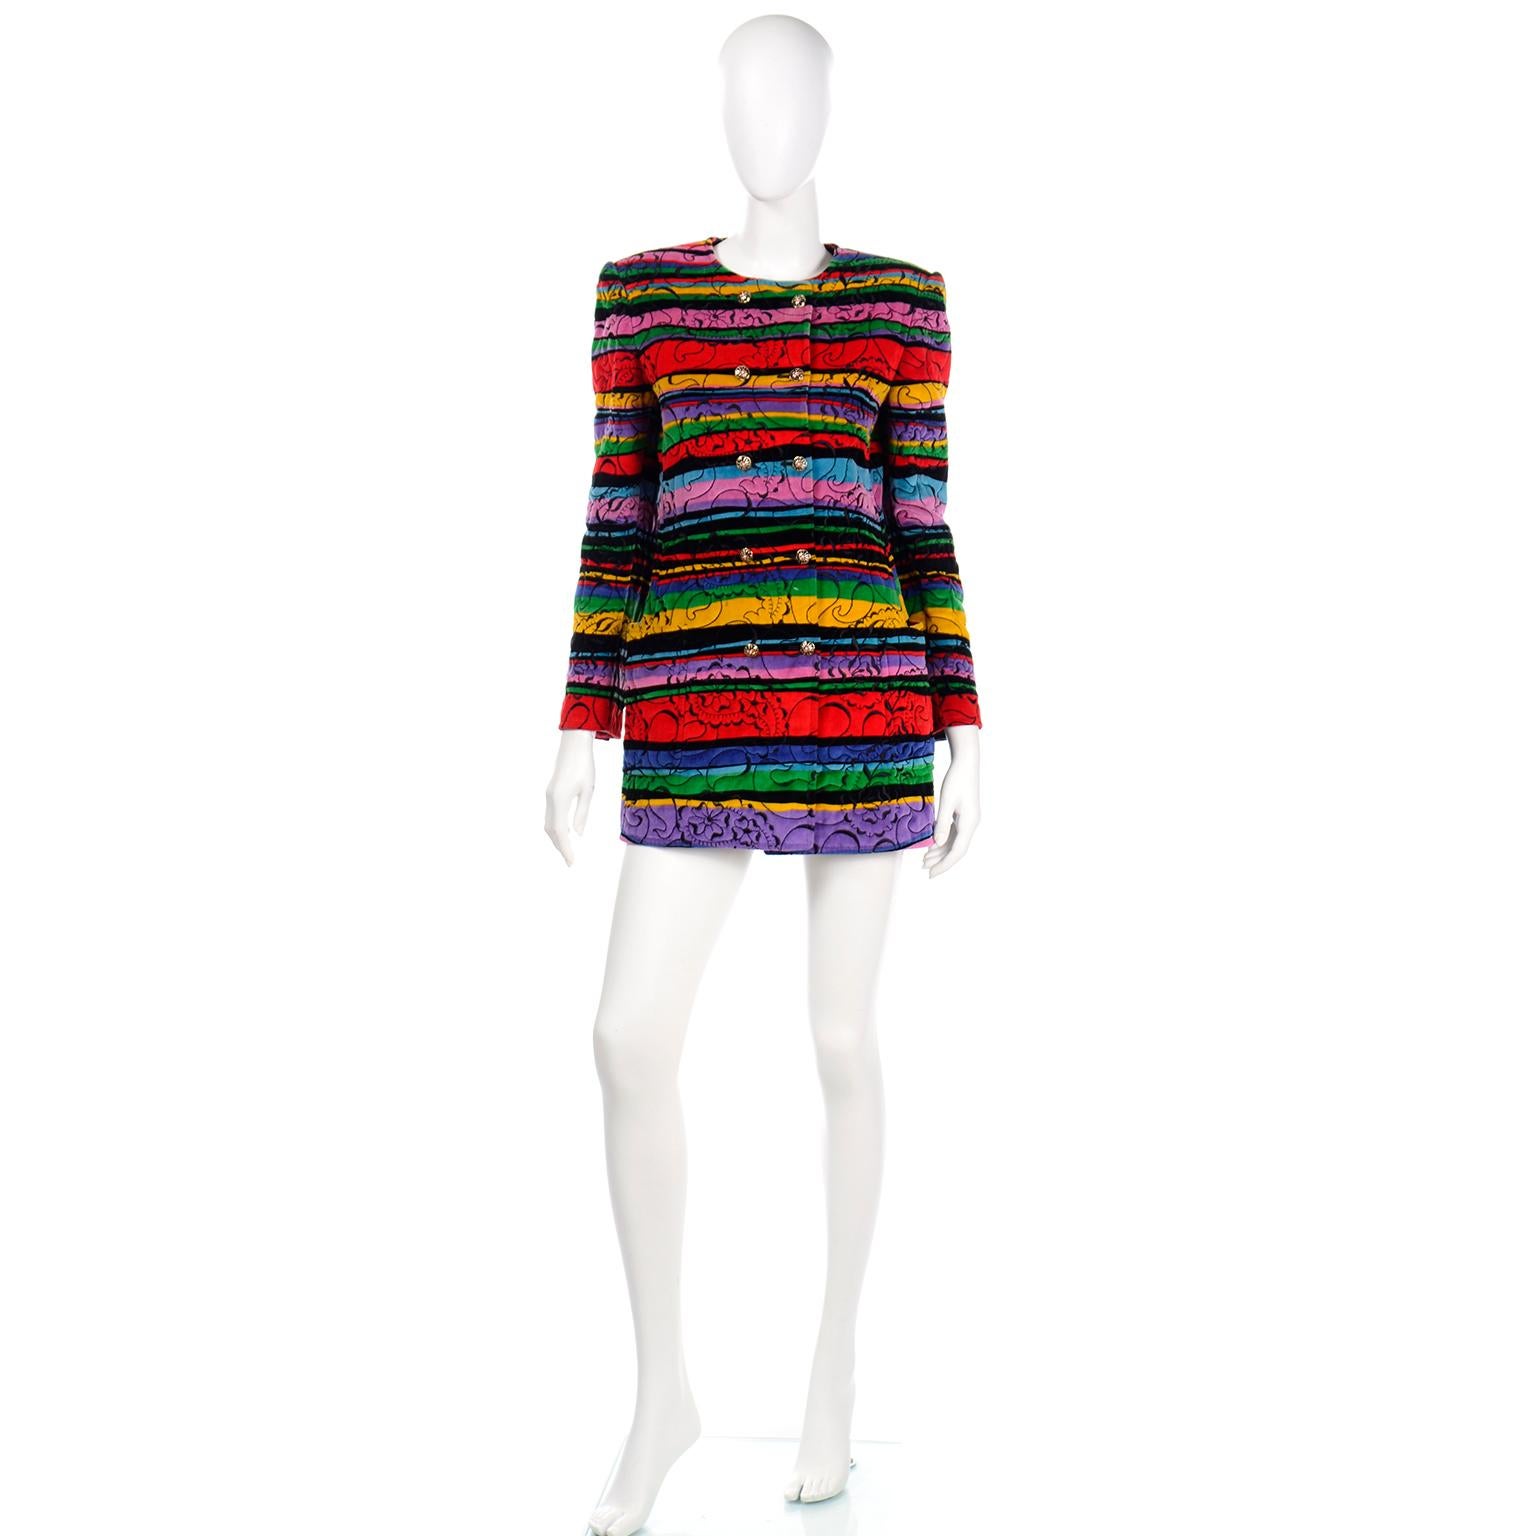 This phenomenal vintage Emanuel Ungaro Parallele jacket is bursting with color! The lush cotton faced velvet fabric is topstitched with black abstract shapes and the body of the jacket consists of various widths of horizontal stripes in a virtual